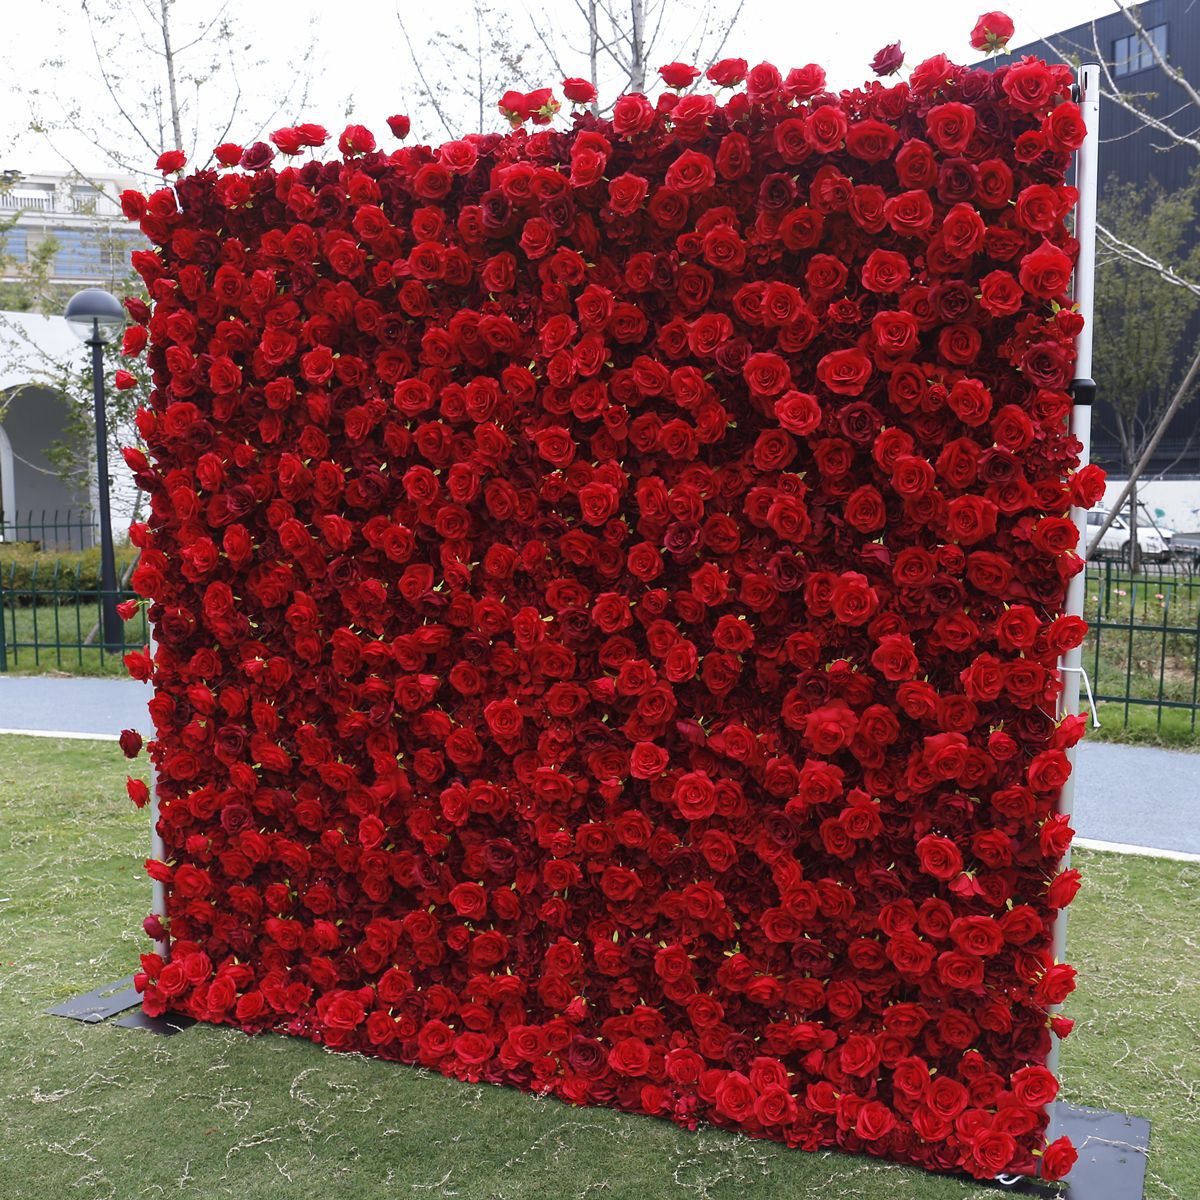 Handmade Artificial Cloth Curtain Silk Red Flower Rose Wall Wedding Backdrop Decoration Outdoor Event Party Decor Props